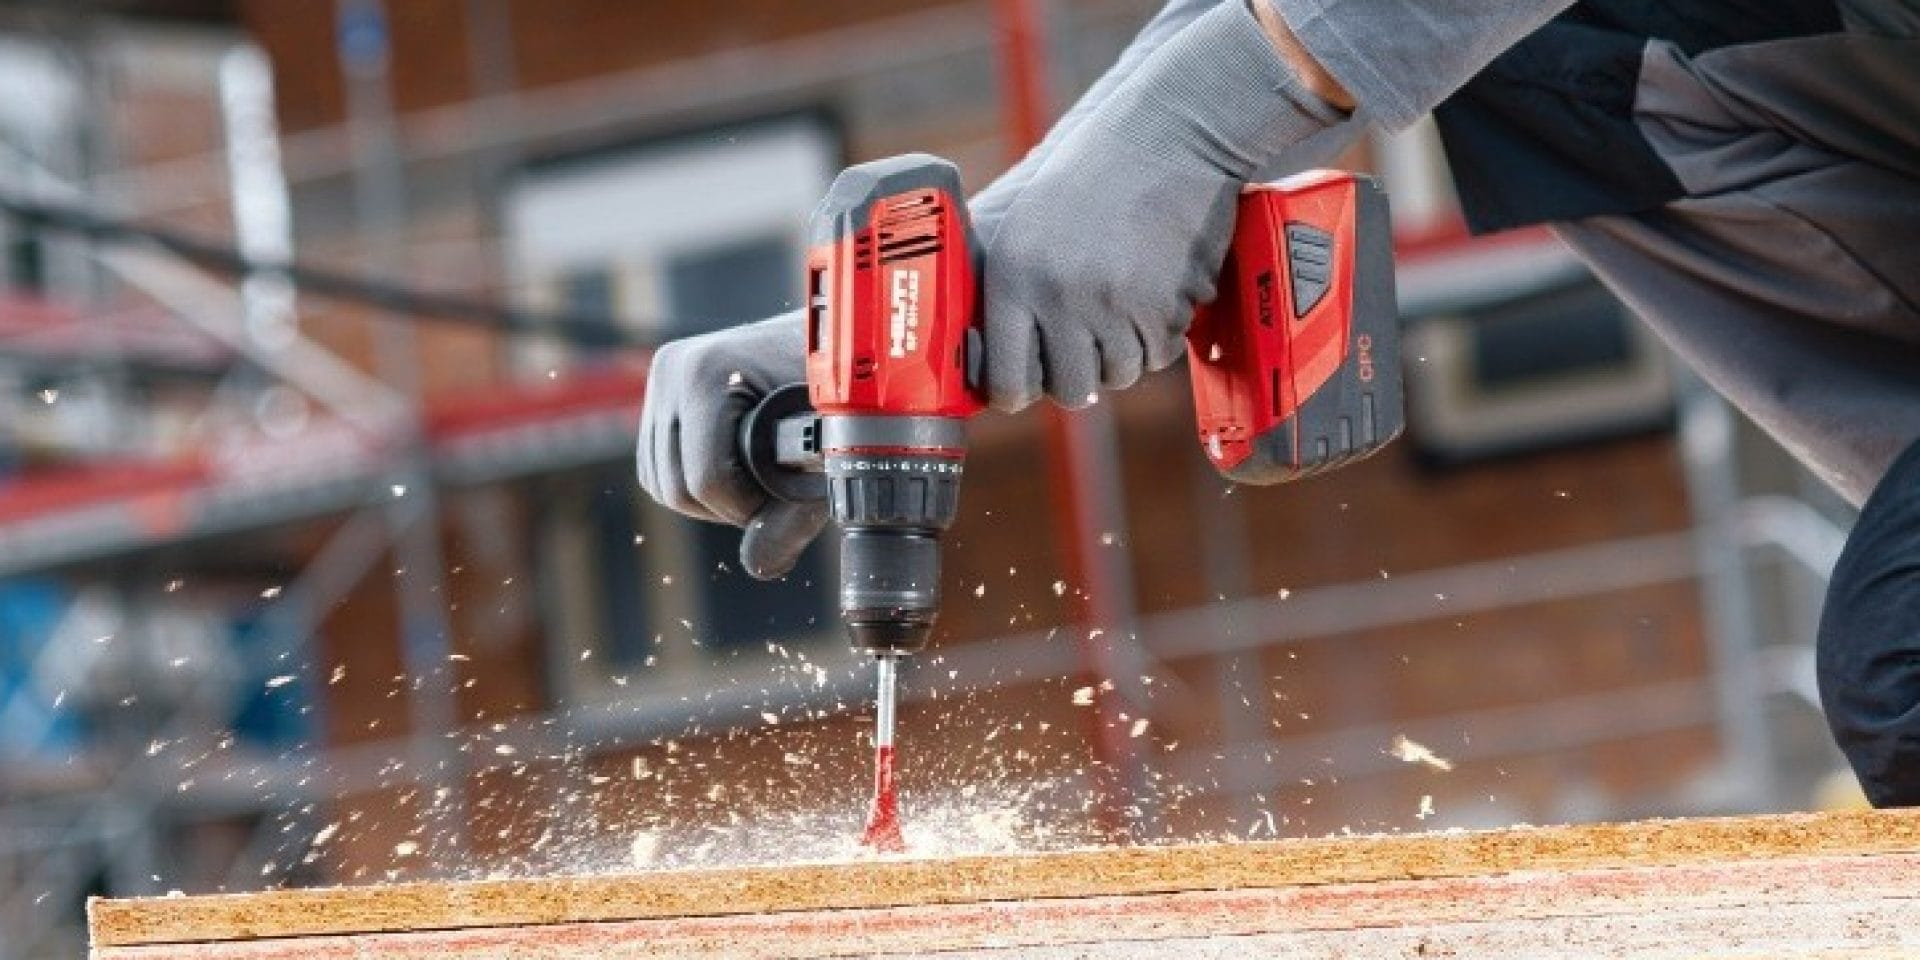 How cordless tools can save time for South African tradies